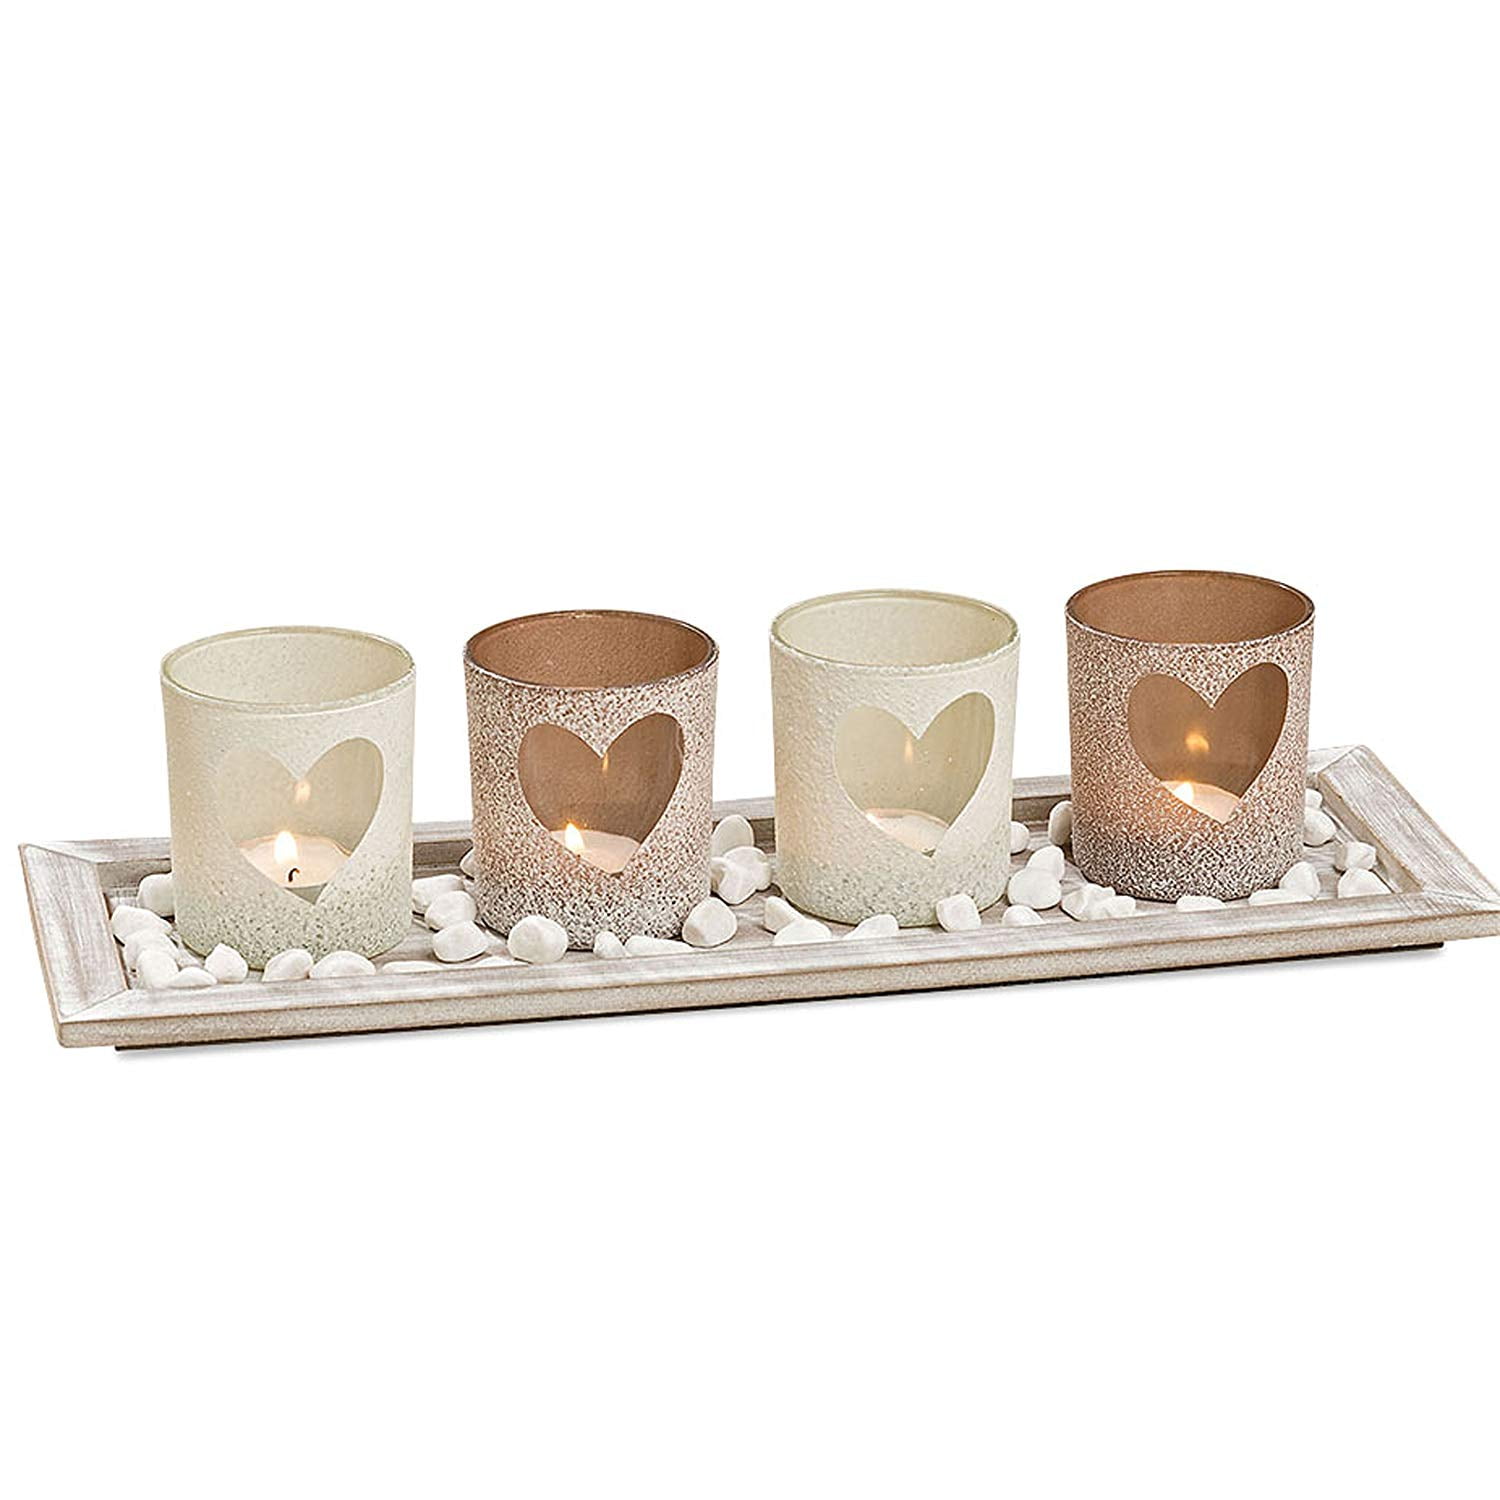 Includes 5 Glass Tealight Candle Holders Reflective Rhinestones 14.5 Inches Shimmery Silver Inset Mirror 1 Glass Pebble Pack and 1 White Wood Tray White Nights Wind Lights Centerpiece Set of 7